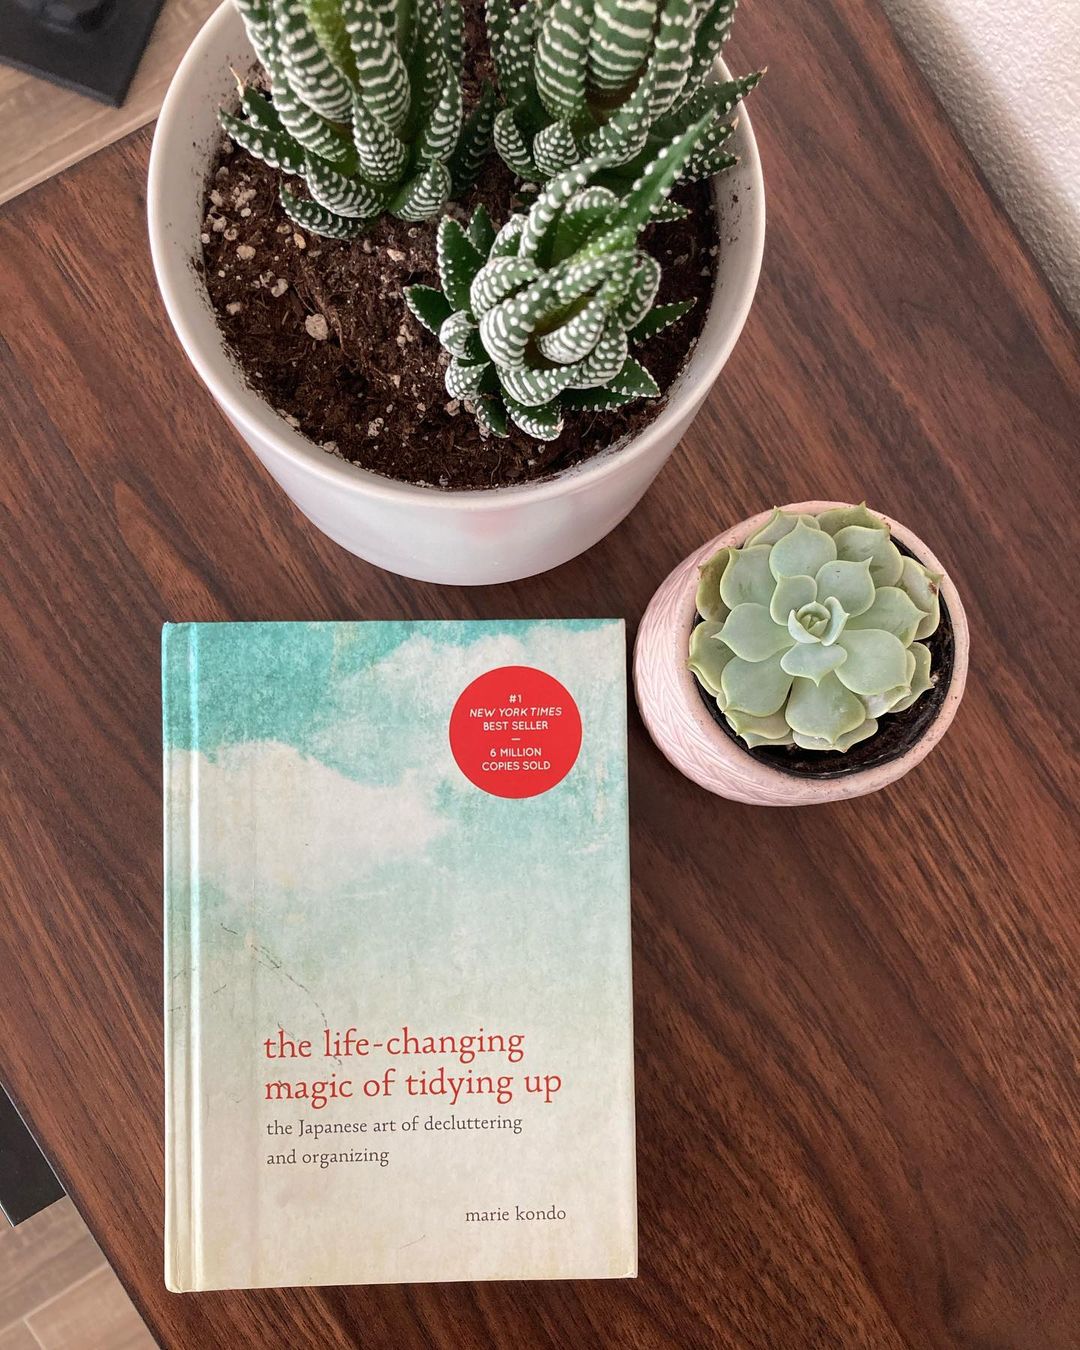 Looking down on Marie Kondo's book, a small succulent, and a larger aloe plant. Photo by Instagram user @thedaughterdiaries.